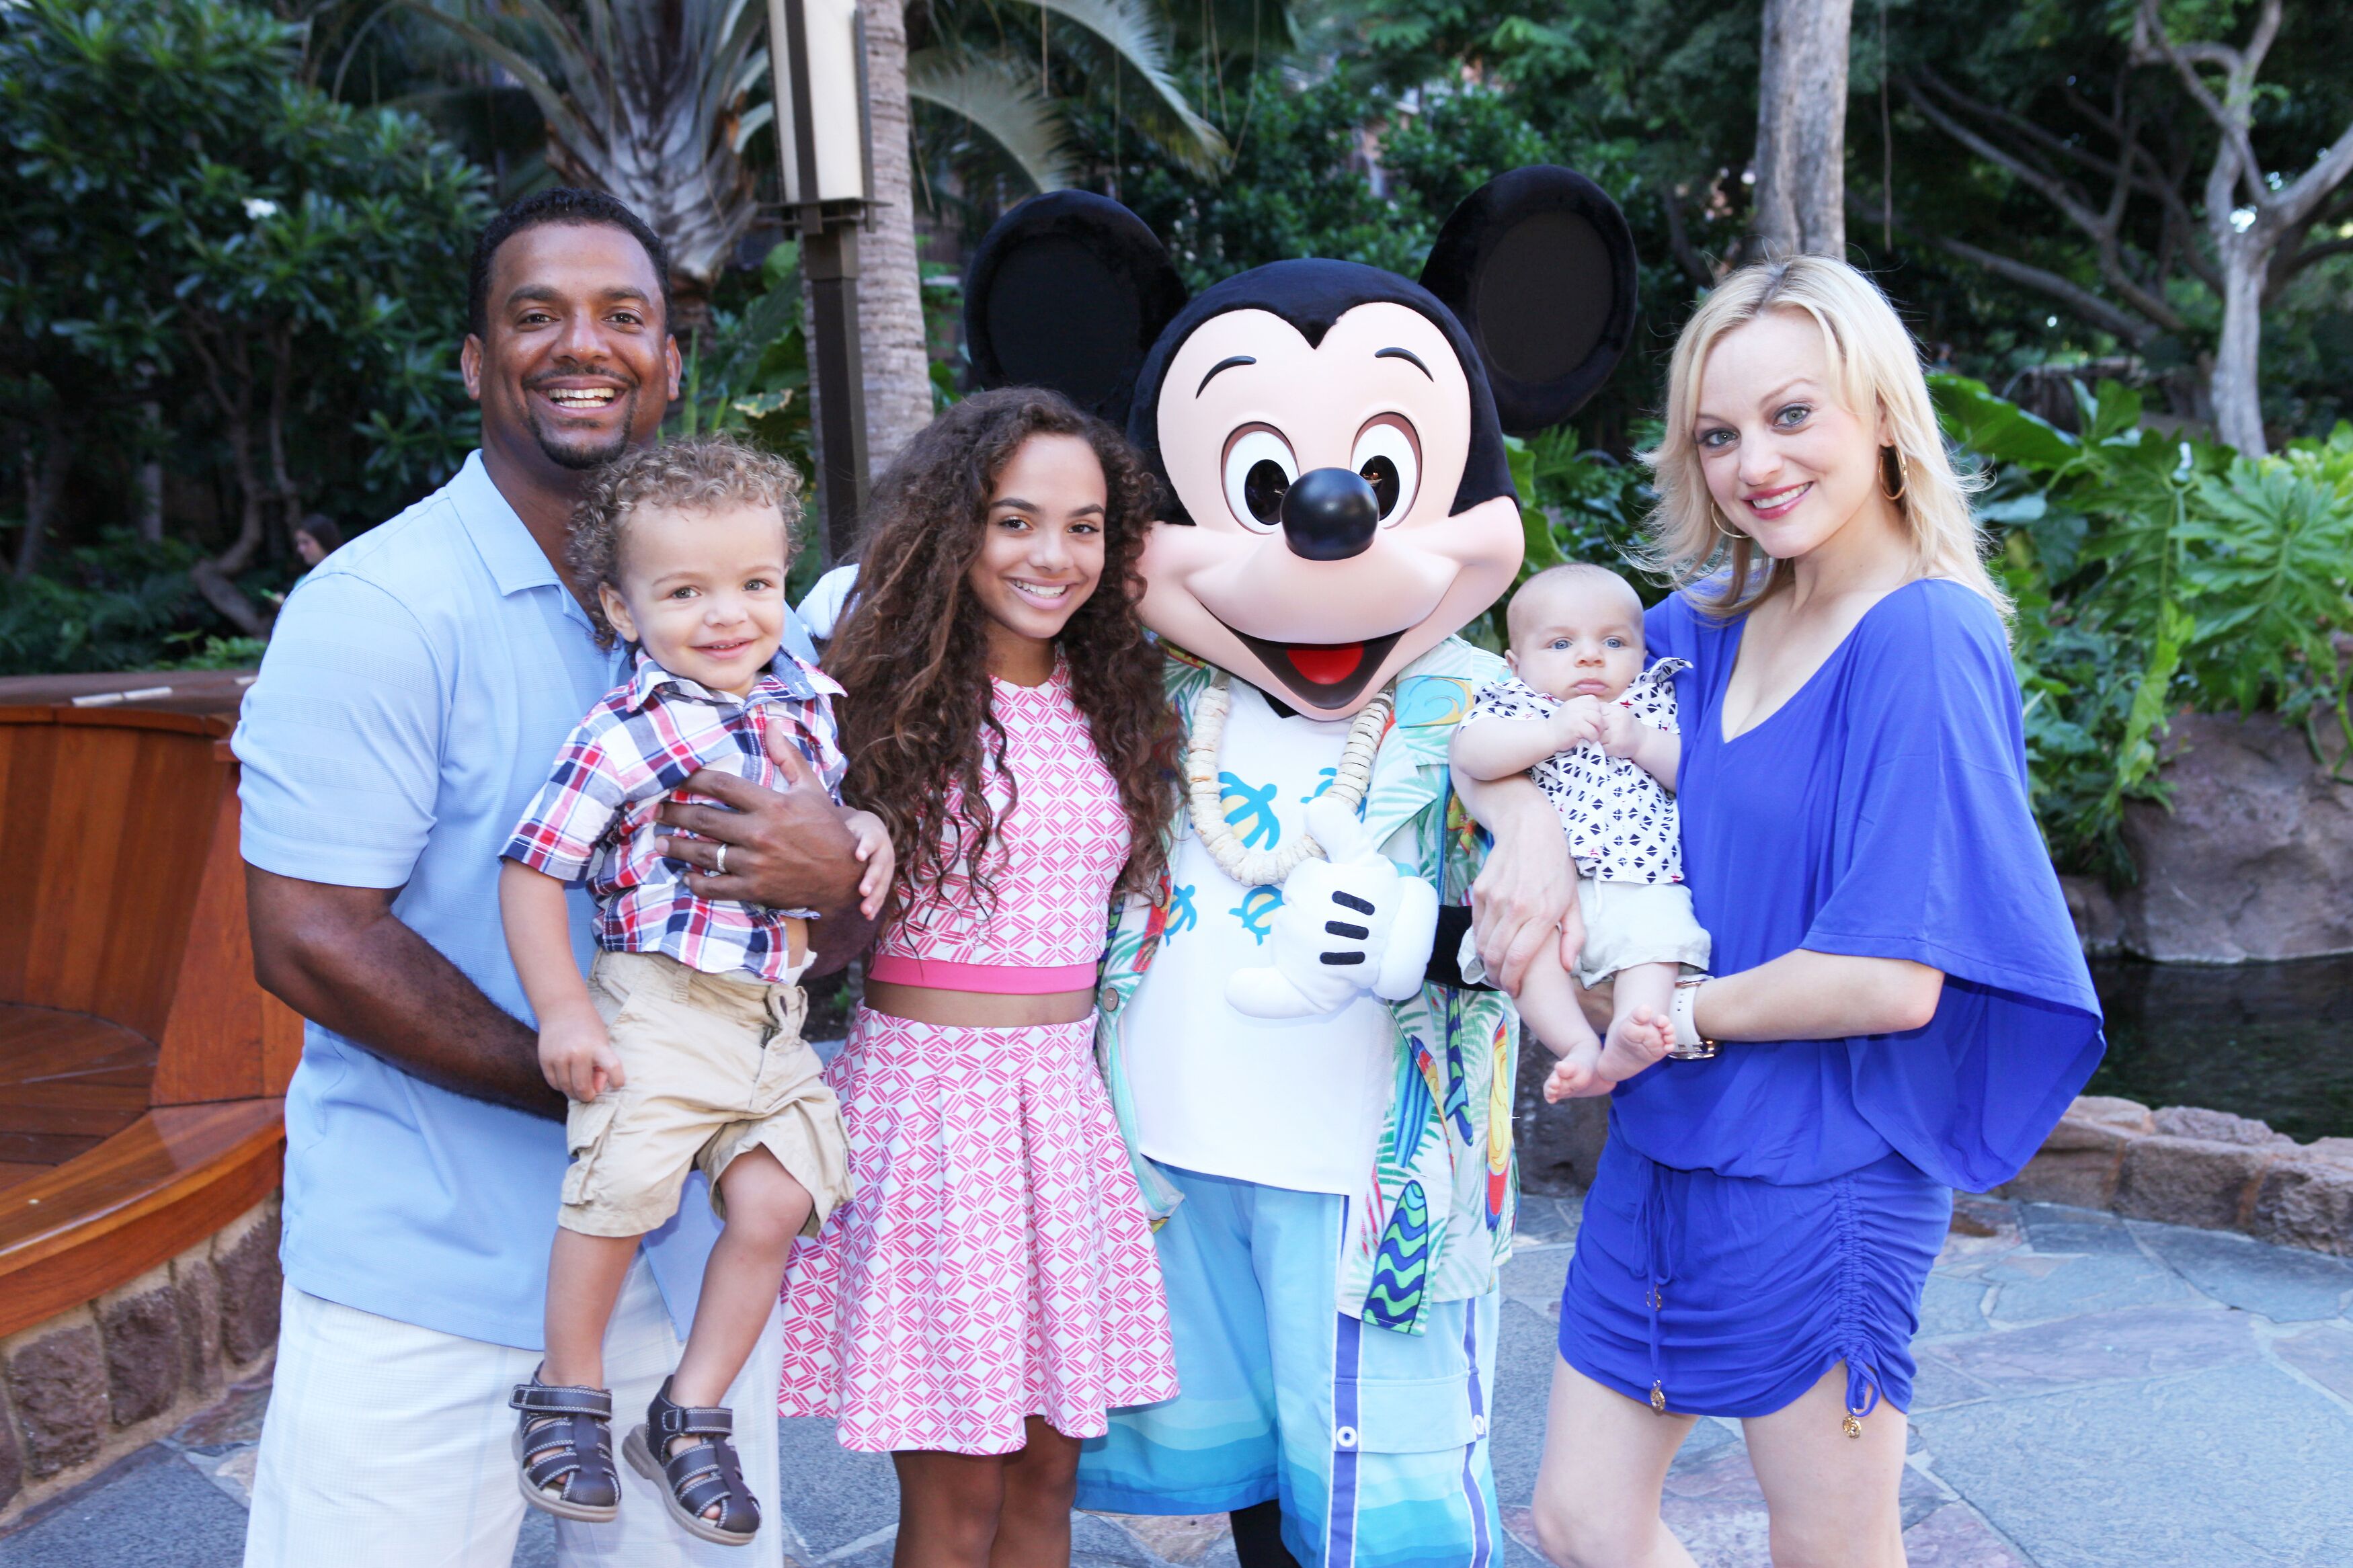 Alfonso and Angela Ribeiro with Alfonso Jr., Sienna, and Anders at the Disney Resort & Spa, on the island of Oahu in Hawaii | Source: Getty Images